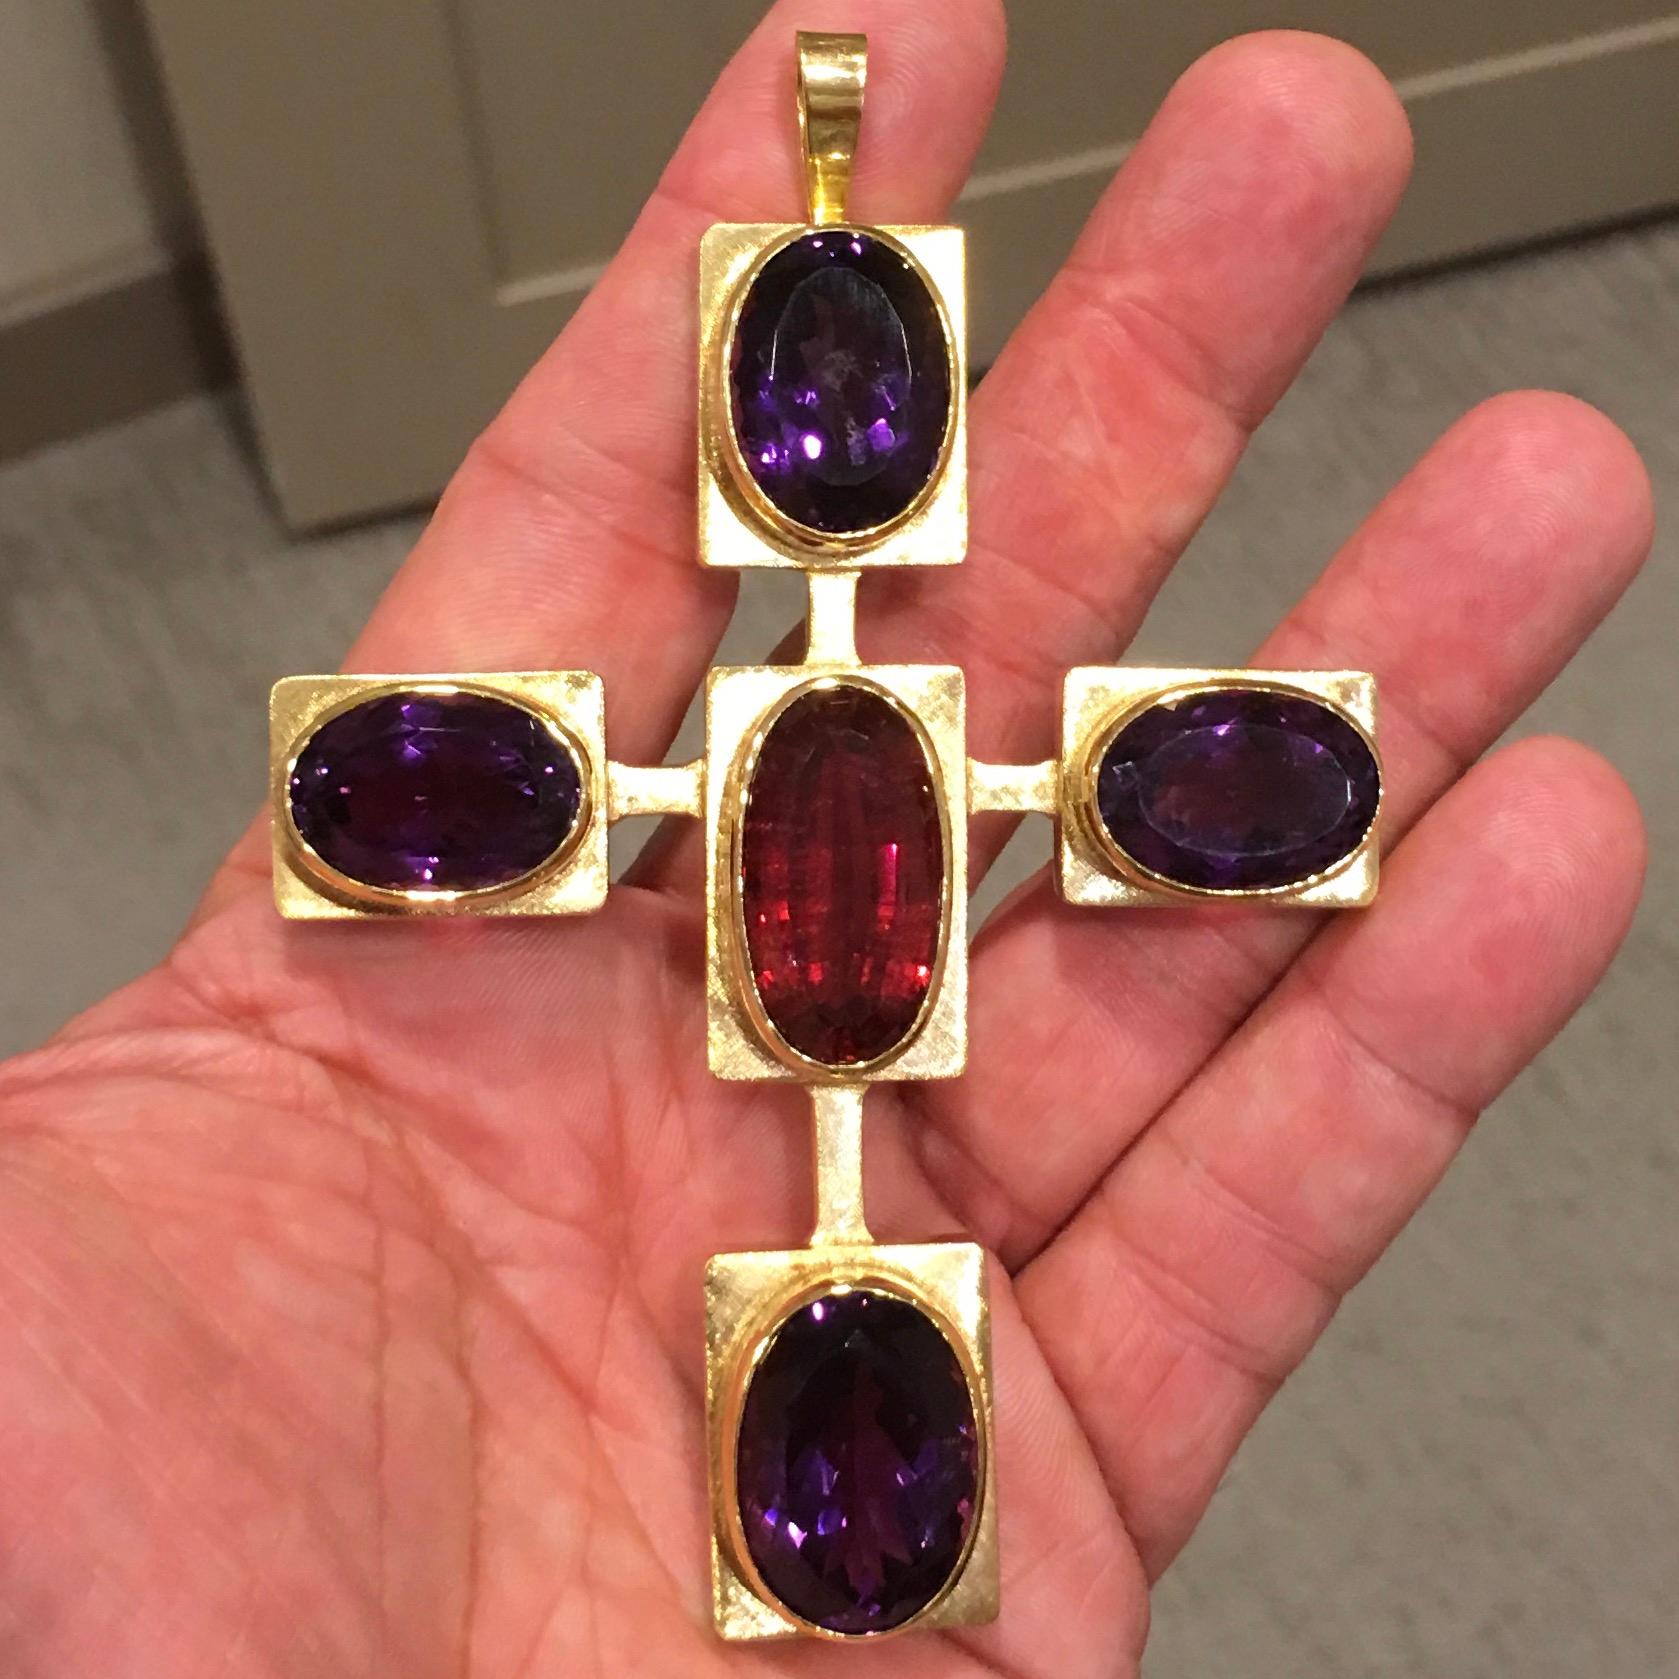 World Renowned Jewelry Designer, Haroldo Burle Marx was commissioned by the Brazilian Government to make unique pieces that were presented to visiting dignitaries. This incredible one of a kind cross was made for His Holiness, Pope John Paul II and